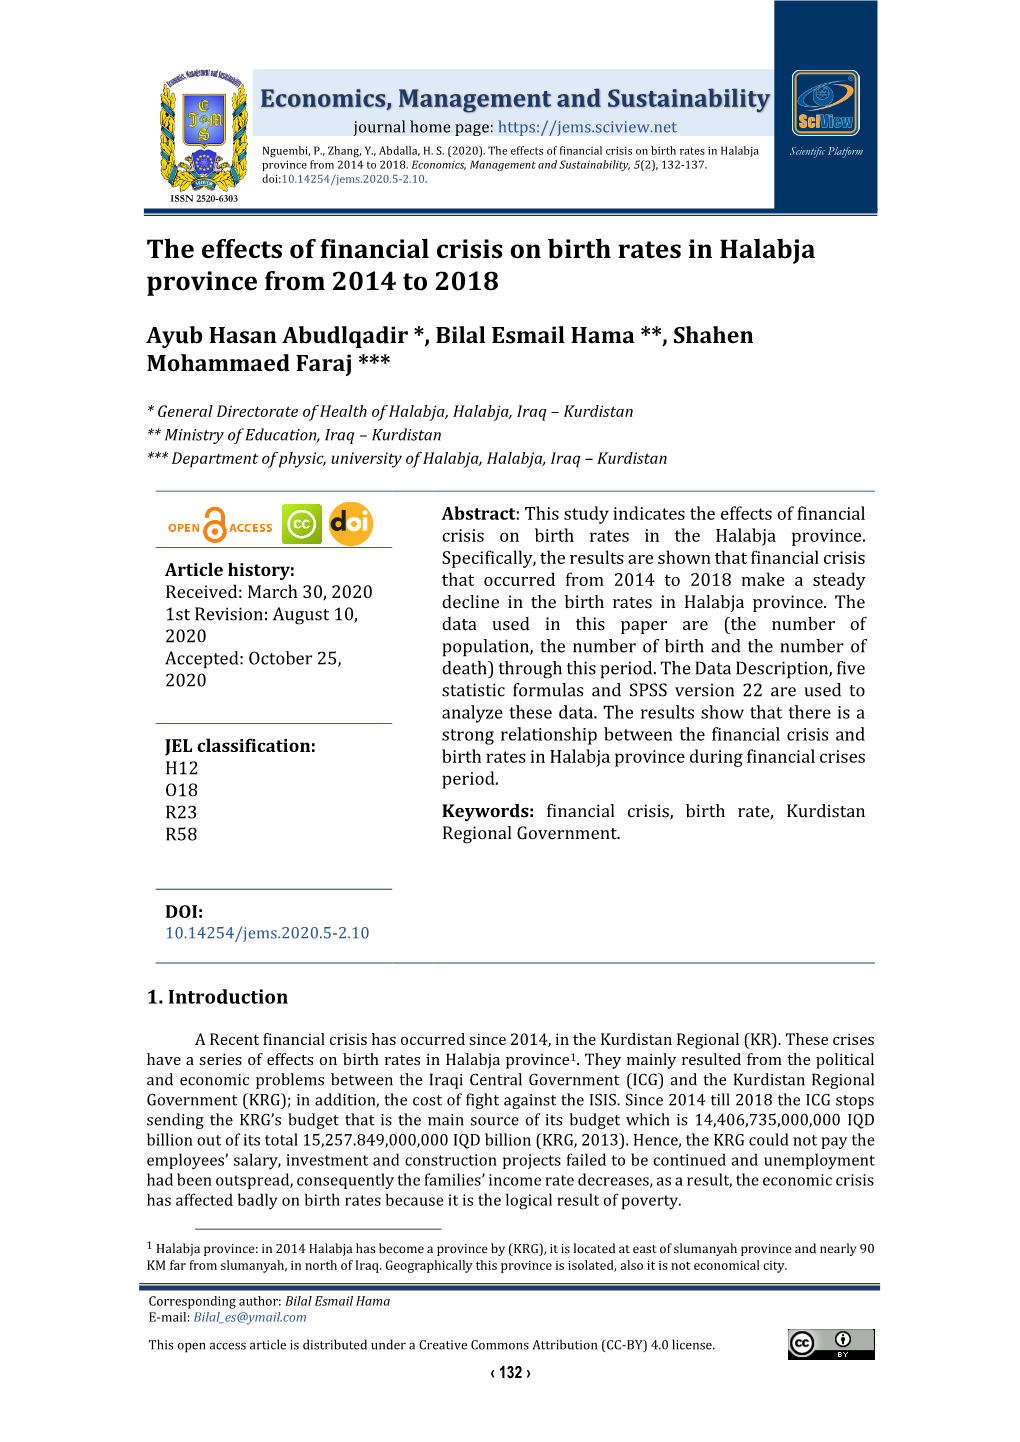 The Effects of Financial Crisis on Birth Rates in Halabja Province from 2014 to 2018